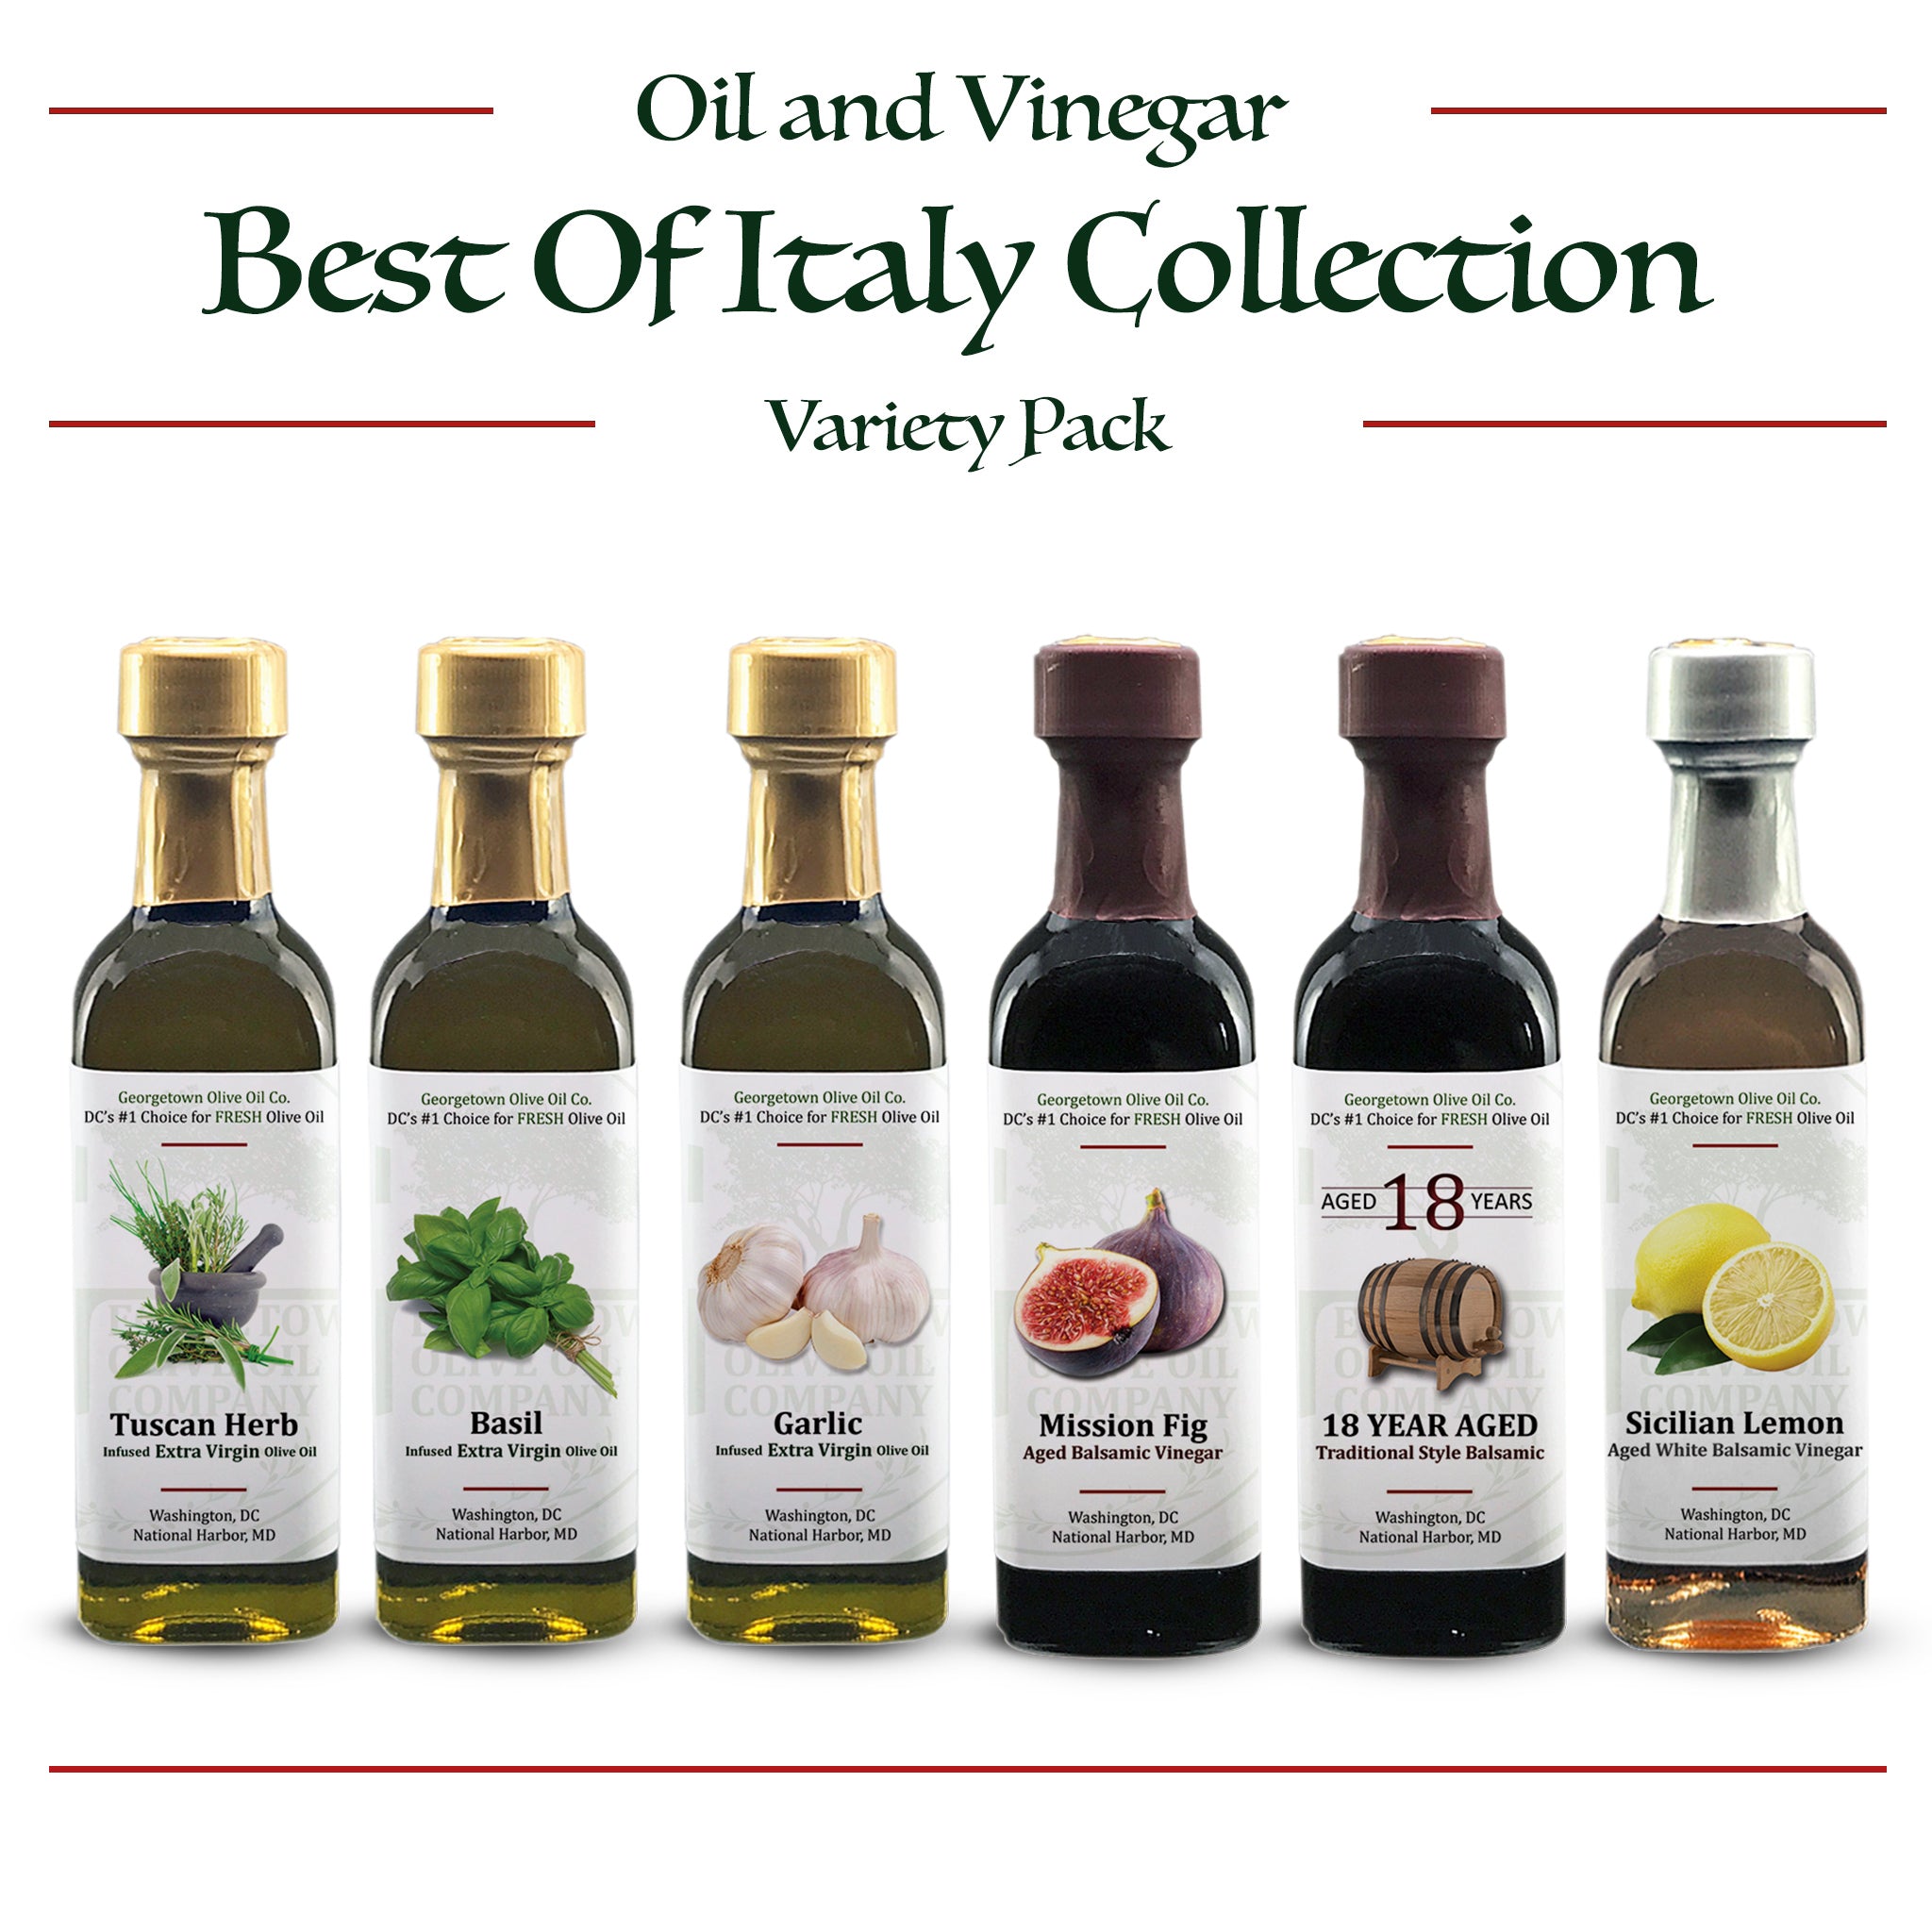 Best Of Italy Collection Oil and Vinegar Variety Pack